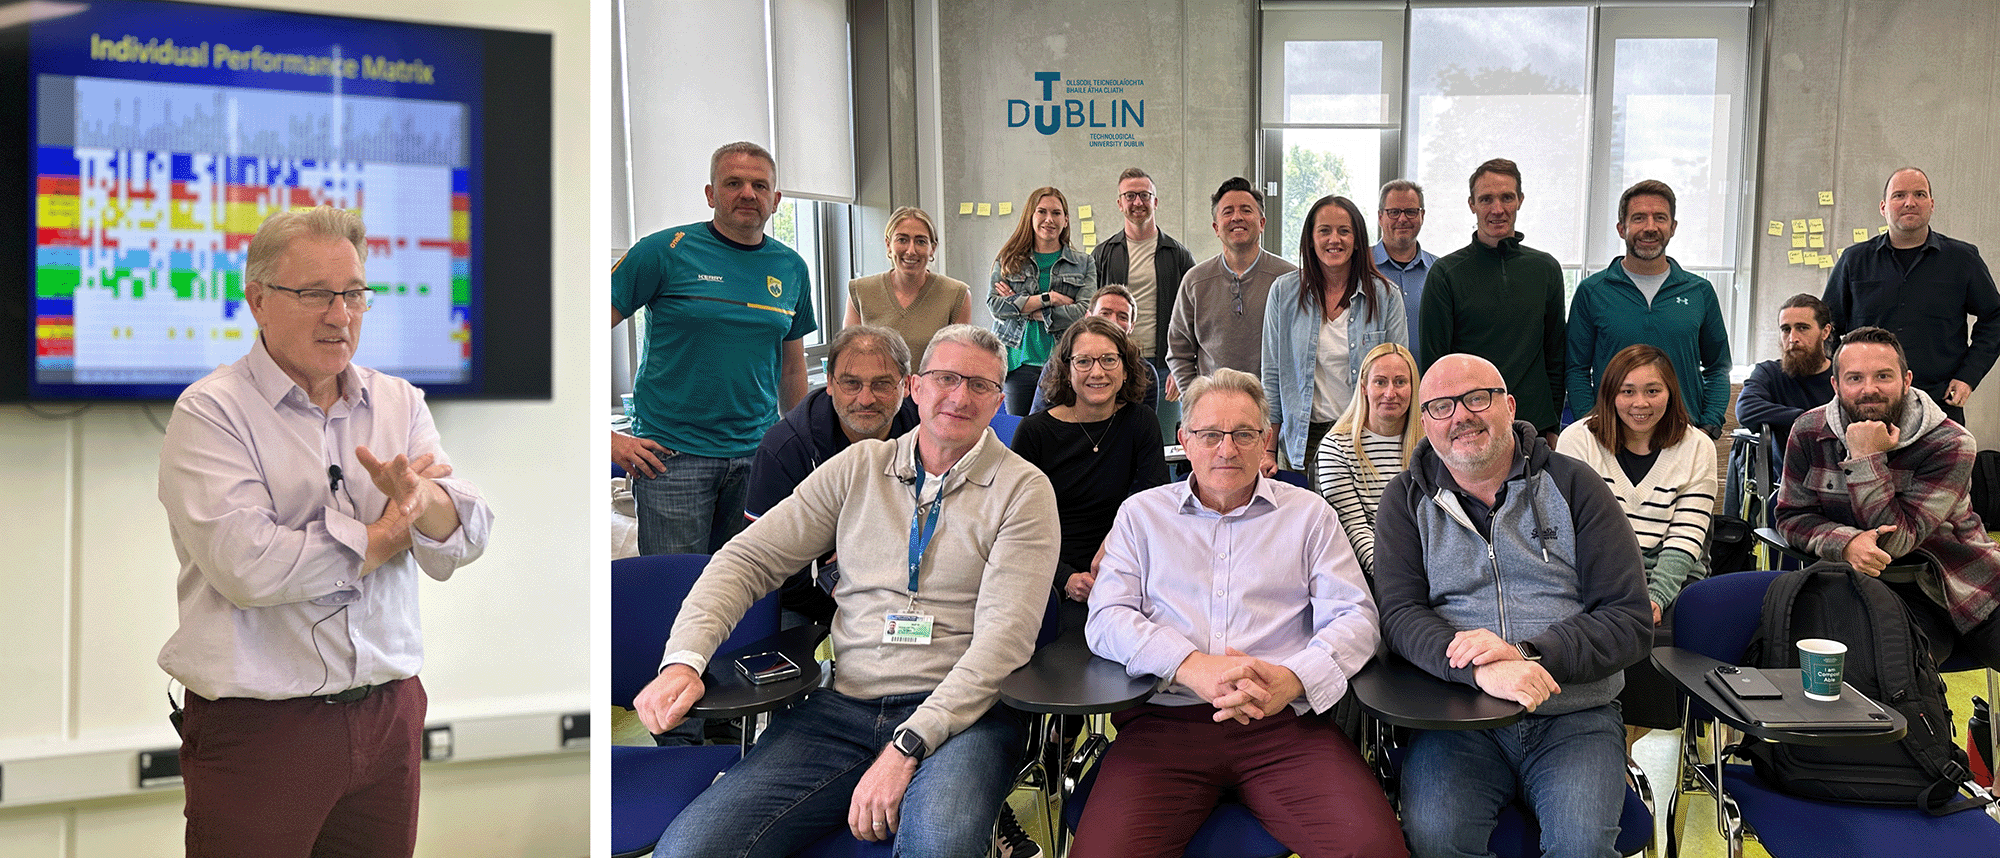 image for Coach Eddie O'Sullivan, guest lecturer on Postgraduate Diploma in Sports Analytics, Technology and Innovation programme